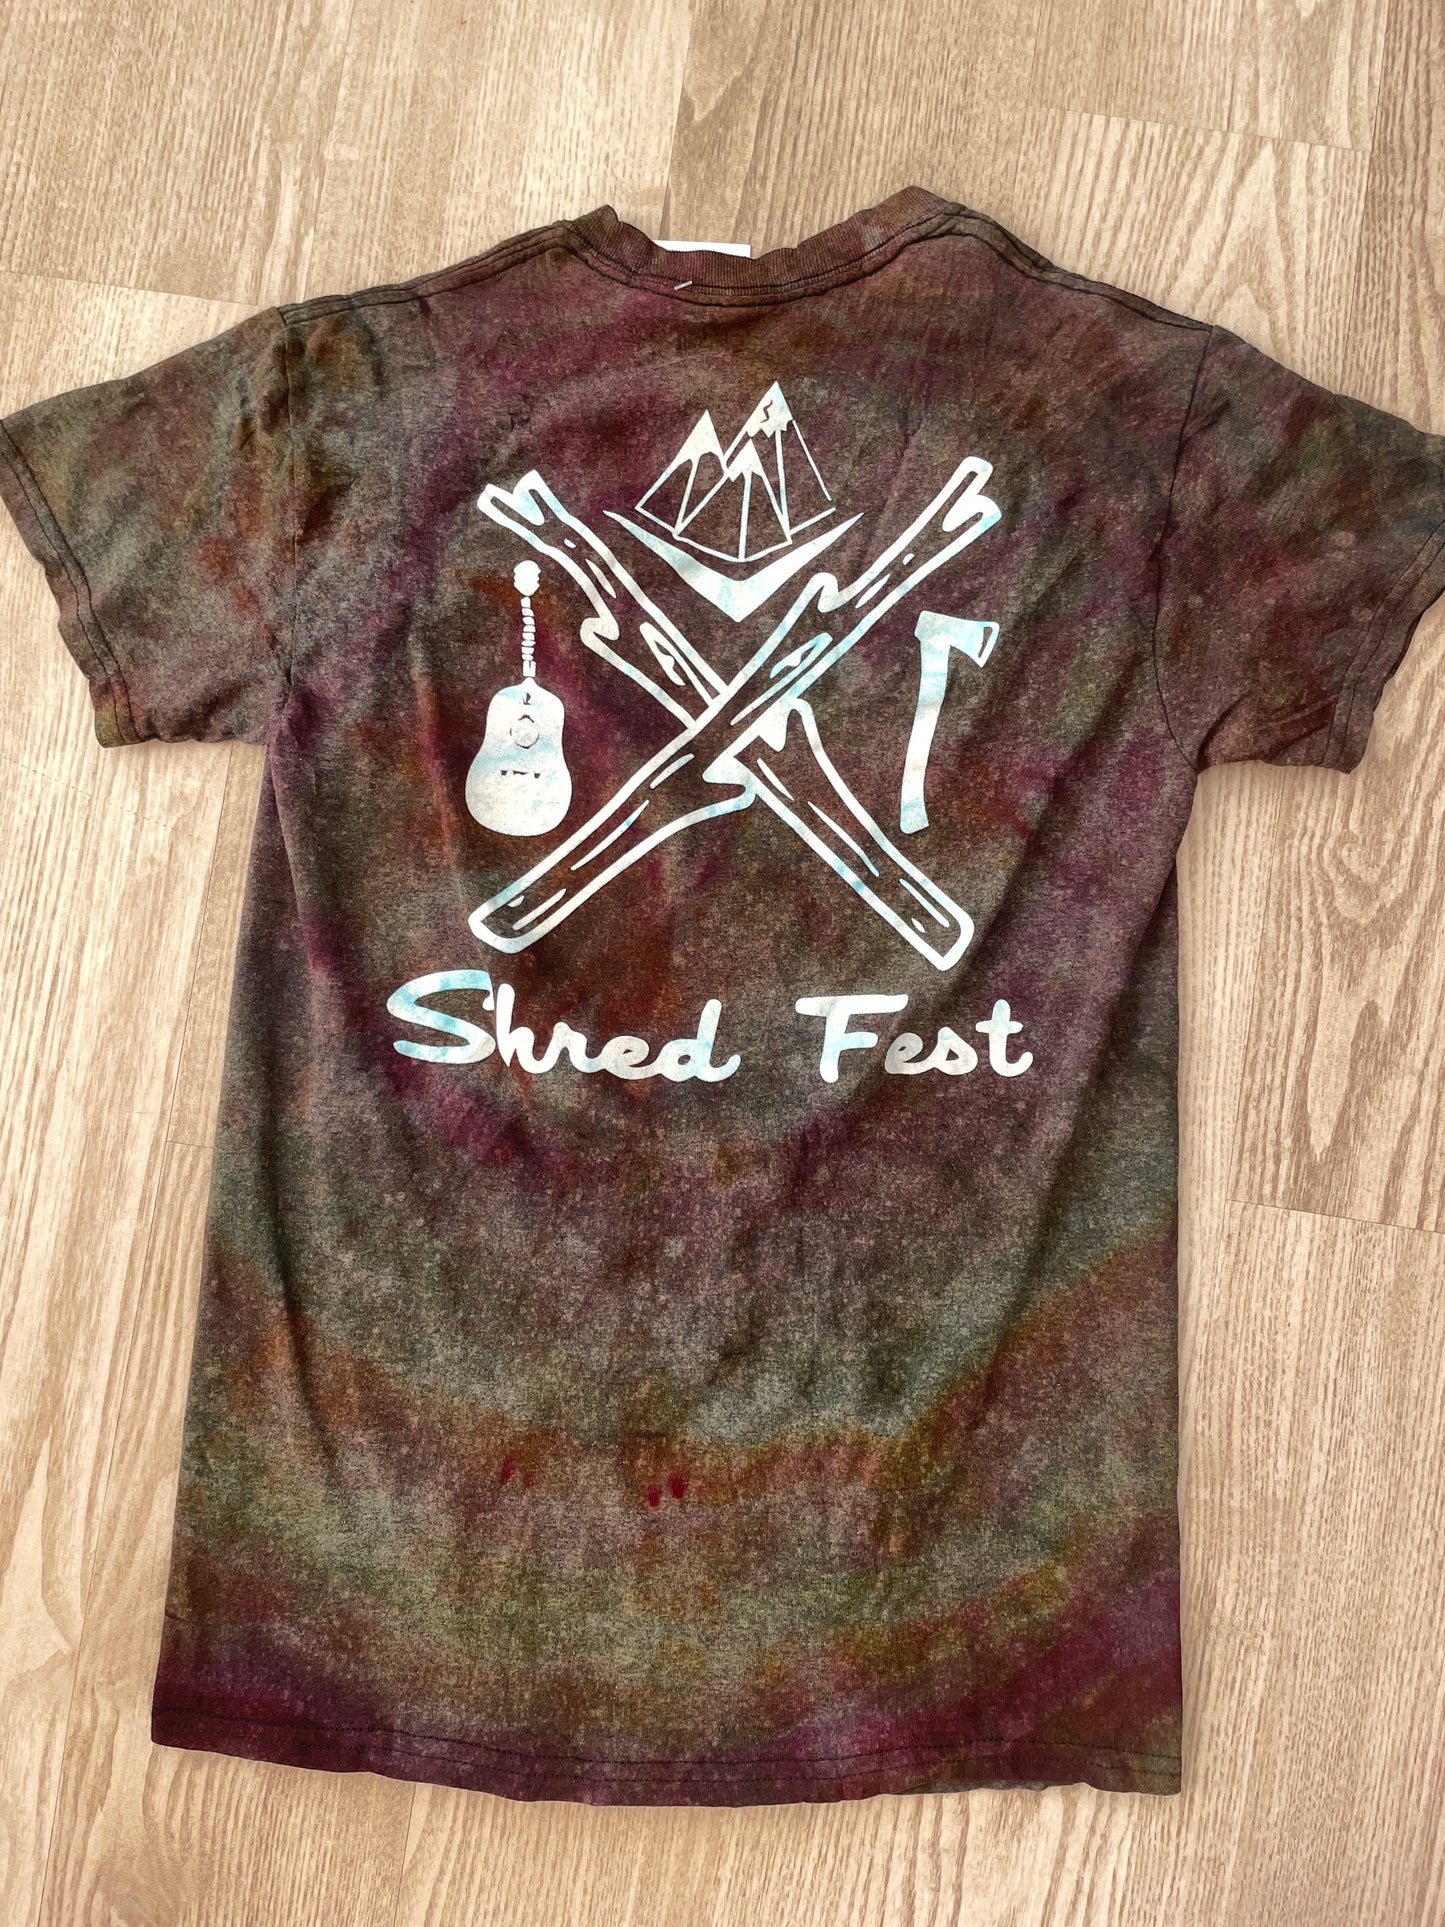 SMALL Men's Shred Fest Handmade Reverse Tie Dye Short Sleeve T-Shirt | One-Of-a-Kind Upcycled Black, Pink, and Orange Geode Top